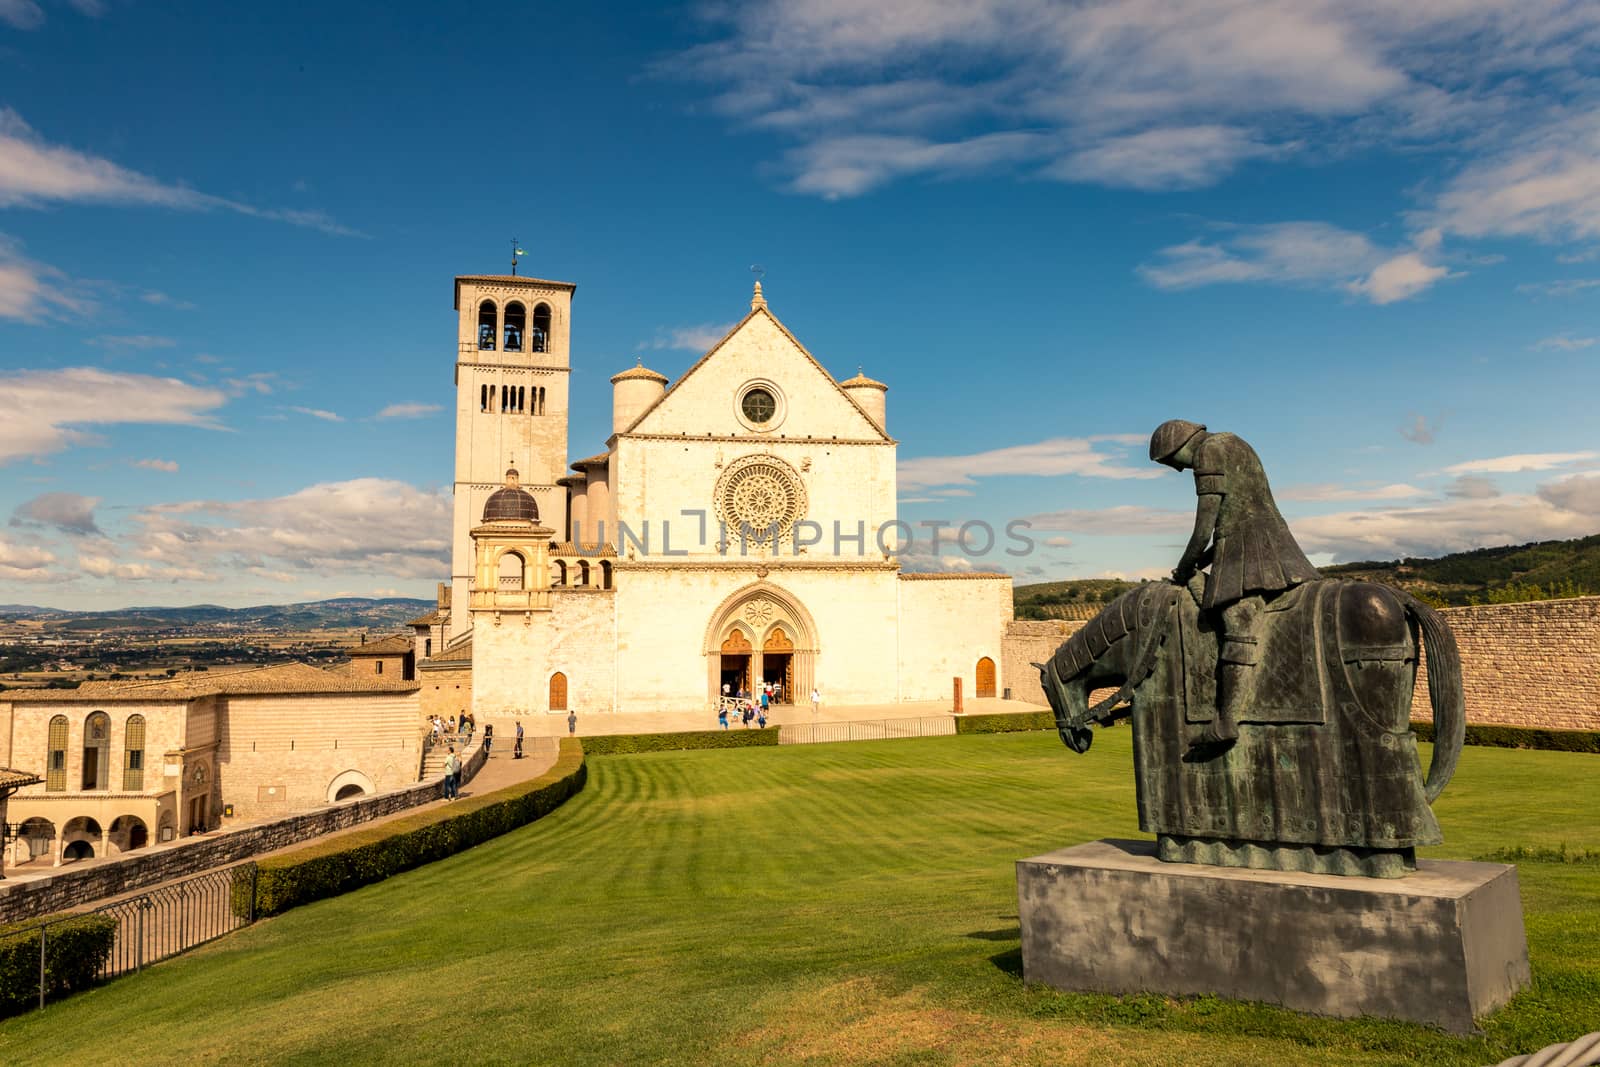 St. Francis of Assisi Church with the statue of St. Francis on a horse in the foreground. St. Francis is the patron saint of Italy. The bell tower can be seen from miles away.